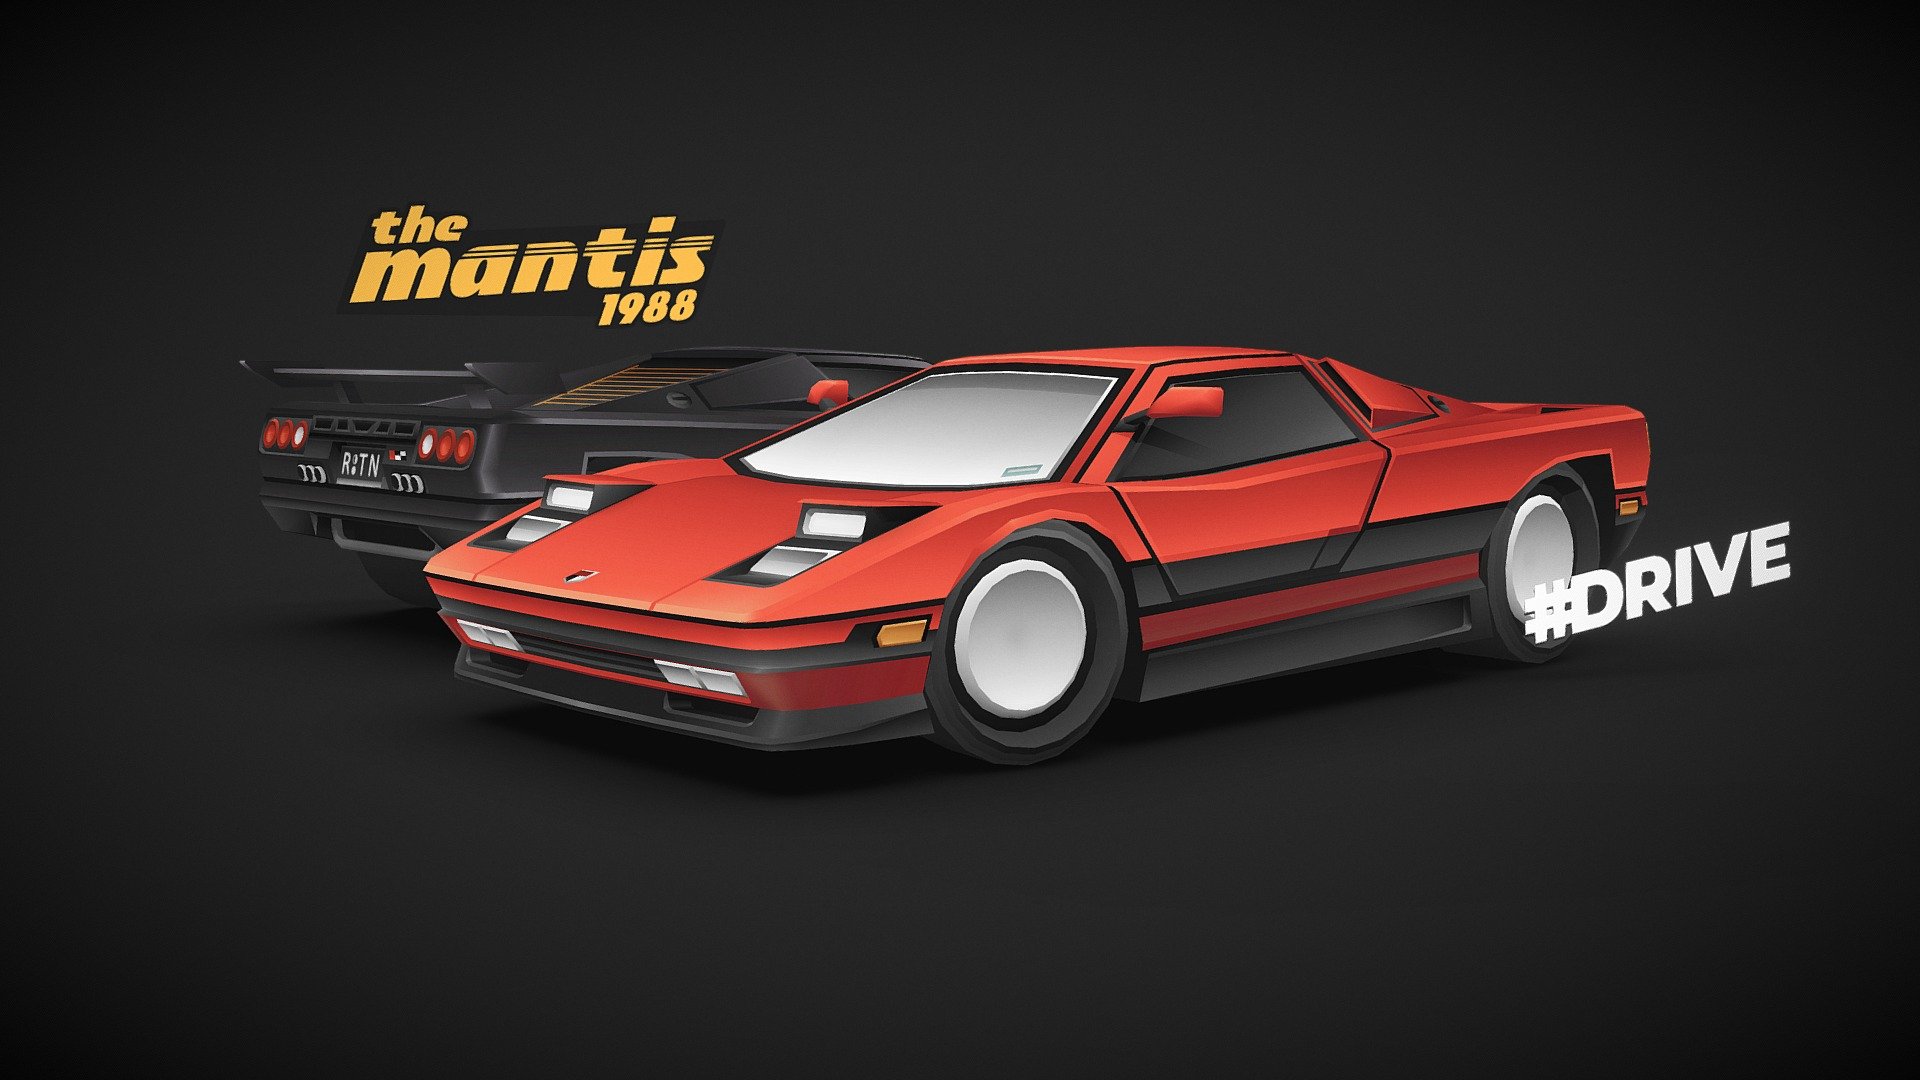 The Mantis from #DRIVE.

Google Play: https://play.google.com/store/apps/details?id=com.pixelperfectdude.htdrive
App Store: https://apps.apple.com/us/app/drive/id1366180154

#DRIVE is an endless driving videogame inspired by road and action movies from 1970s. As simple as possible, allowing the player to pick a car, pick the place and just hit the road. Just be aware not to hit anything else.

Follow us on:
Facebook: http://fb.com/drive.game/
Instagram: http://instagram.com/drive.game
Twitter: http://twitter.com/drivethegame

© Pixel Perfect Dude &amp; Lionsharp Studios 2019 - #DRIVE - The Mantis - 3D model by Barbo (@barbo-autos) 3d model